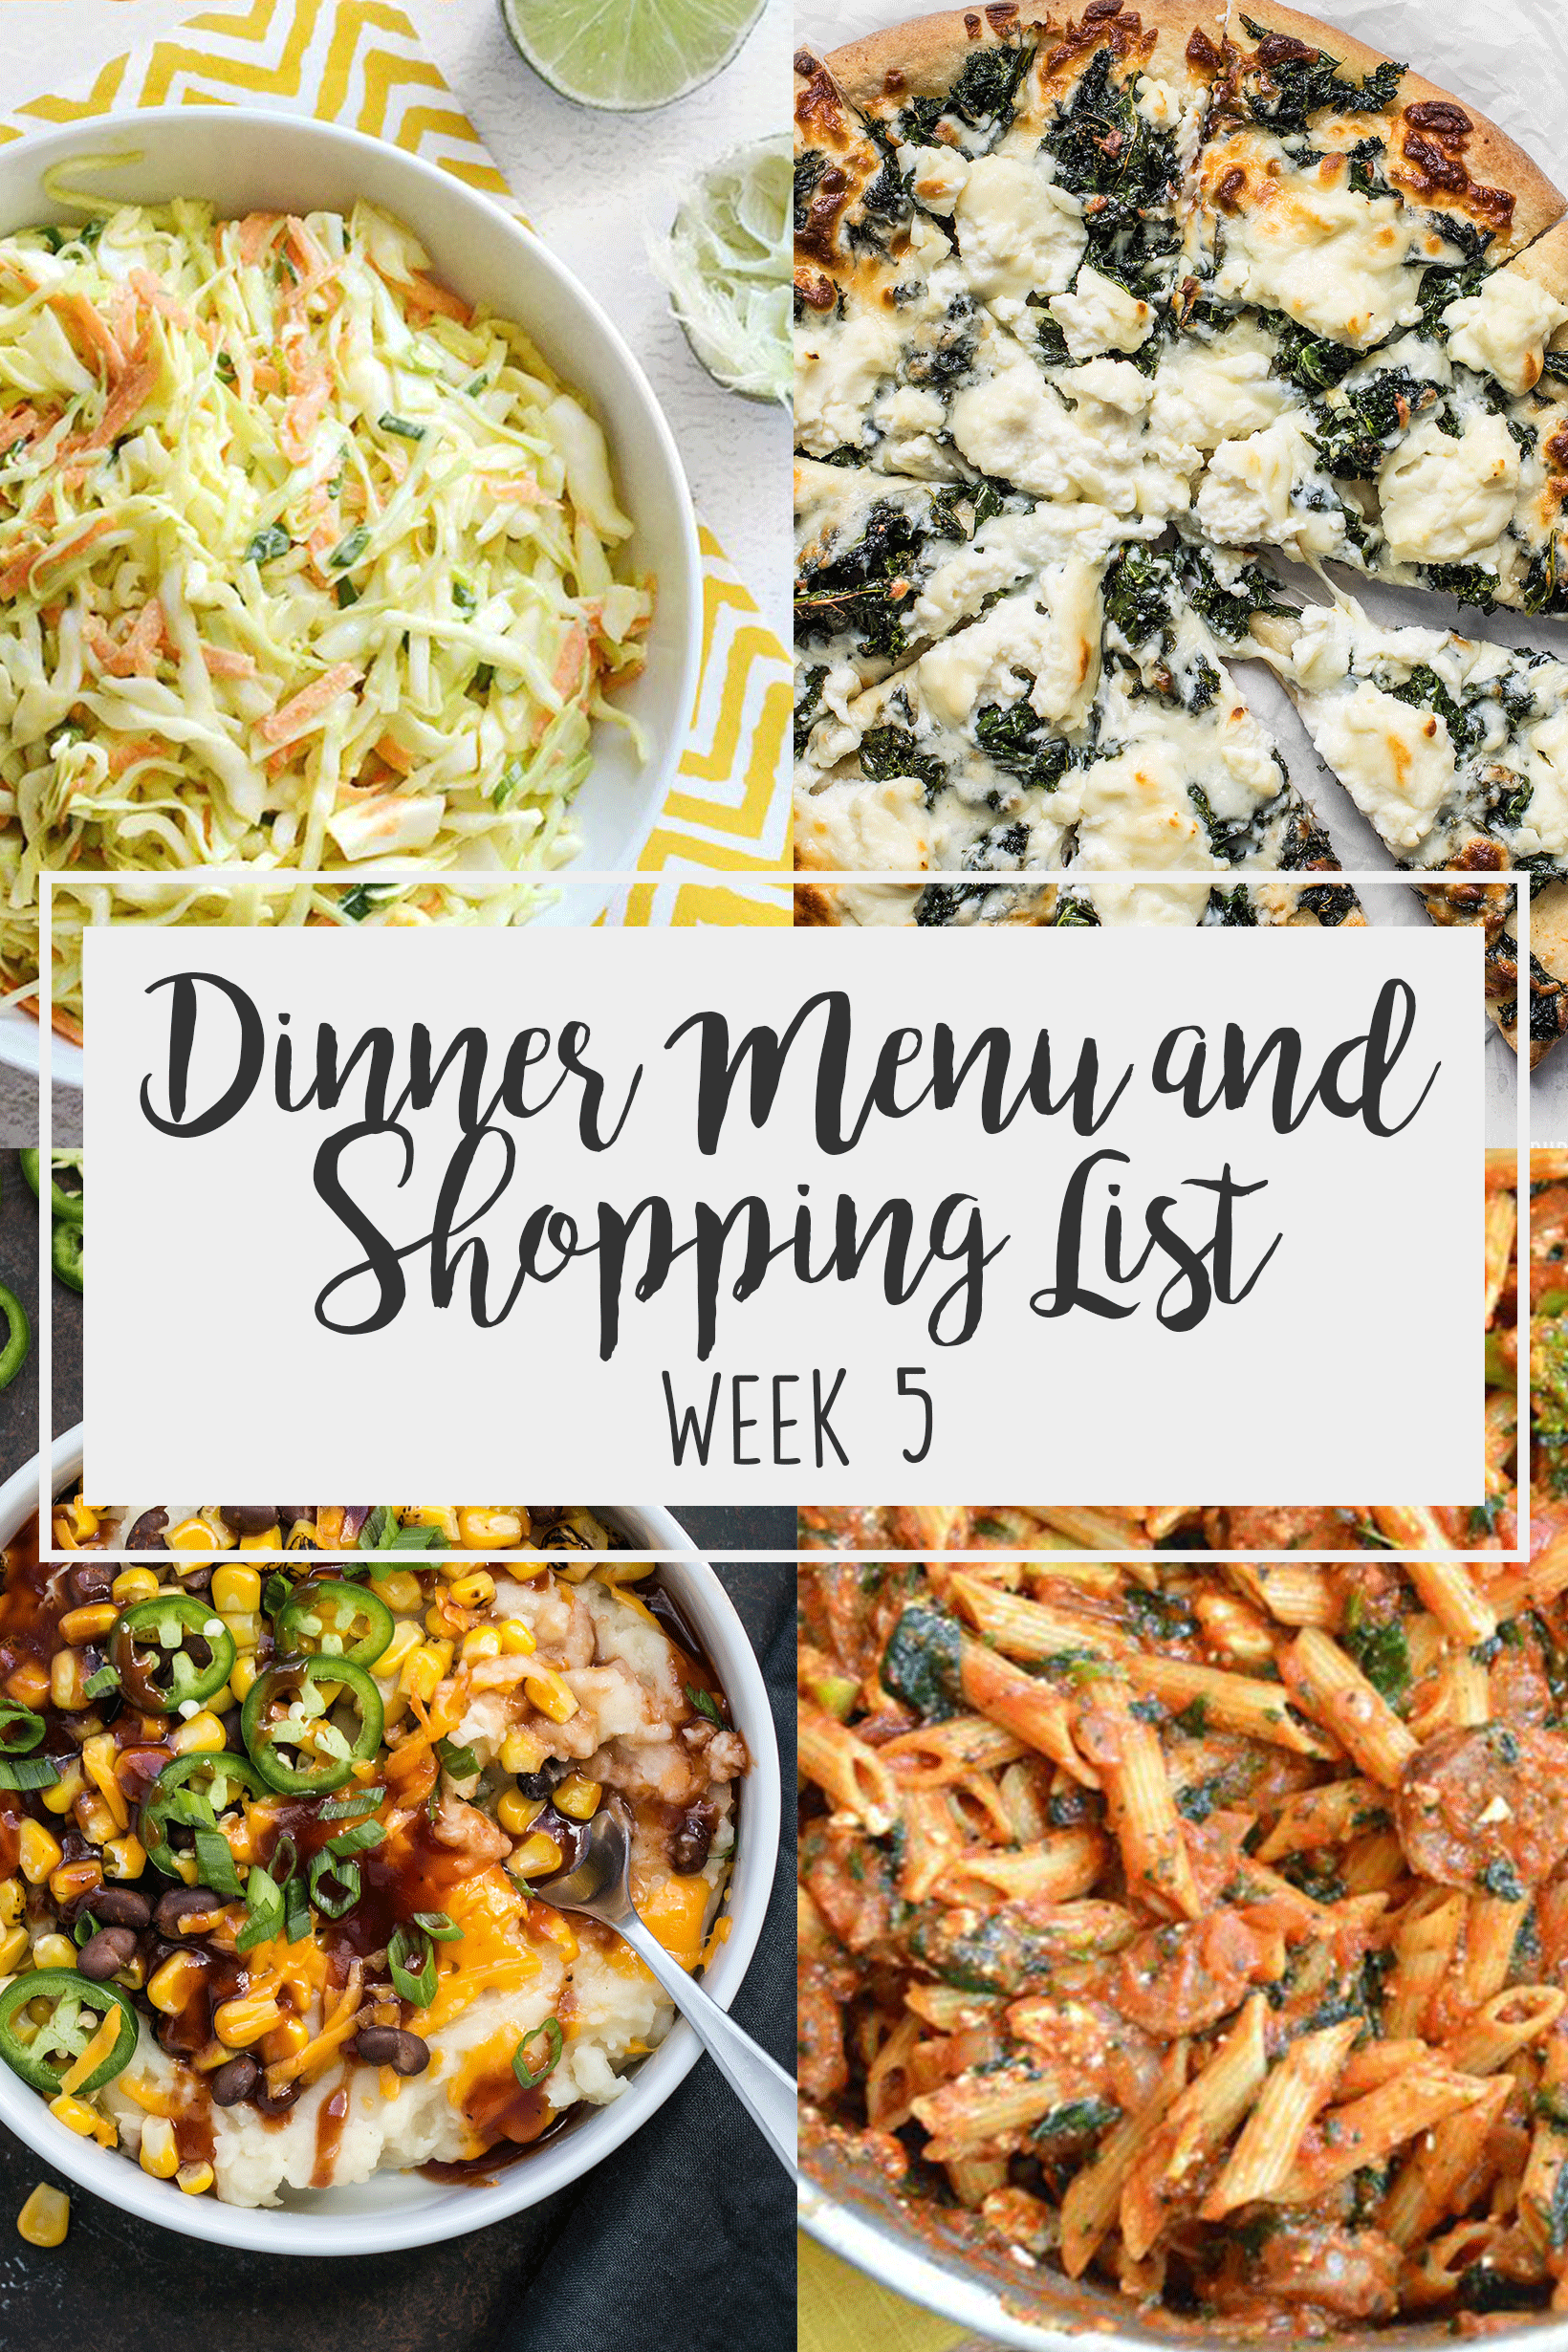 Weekly Menu and Shopping List 5